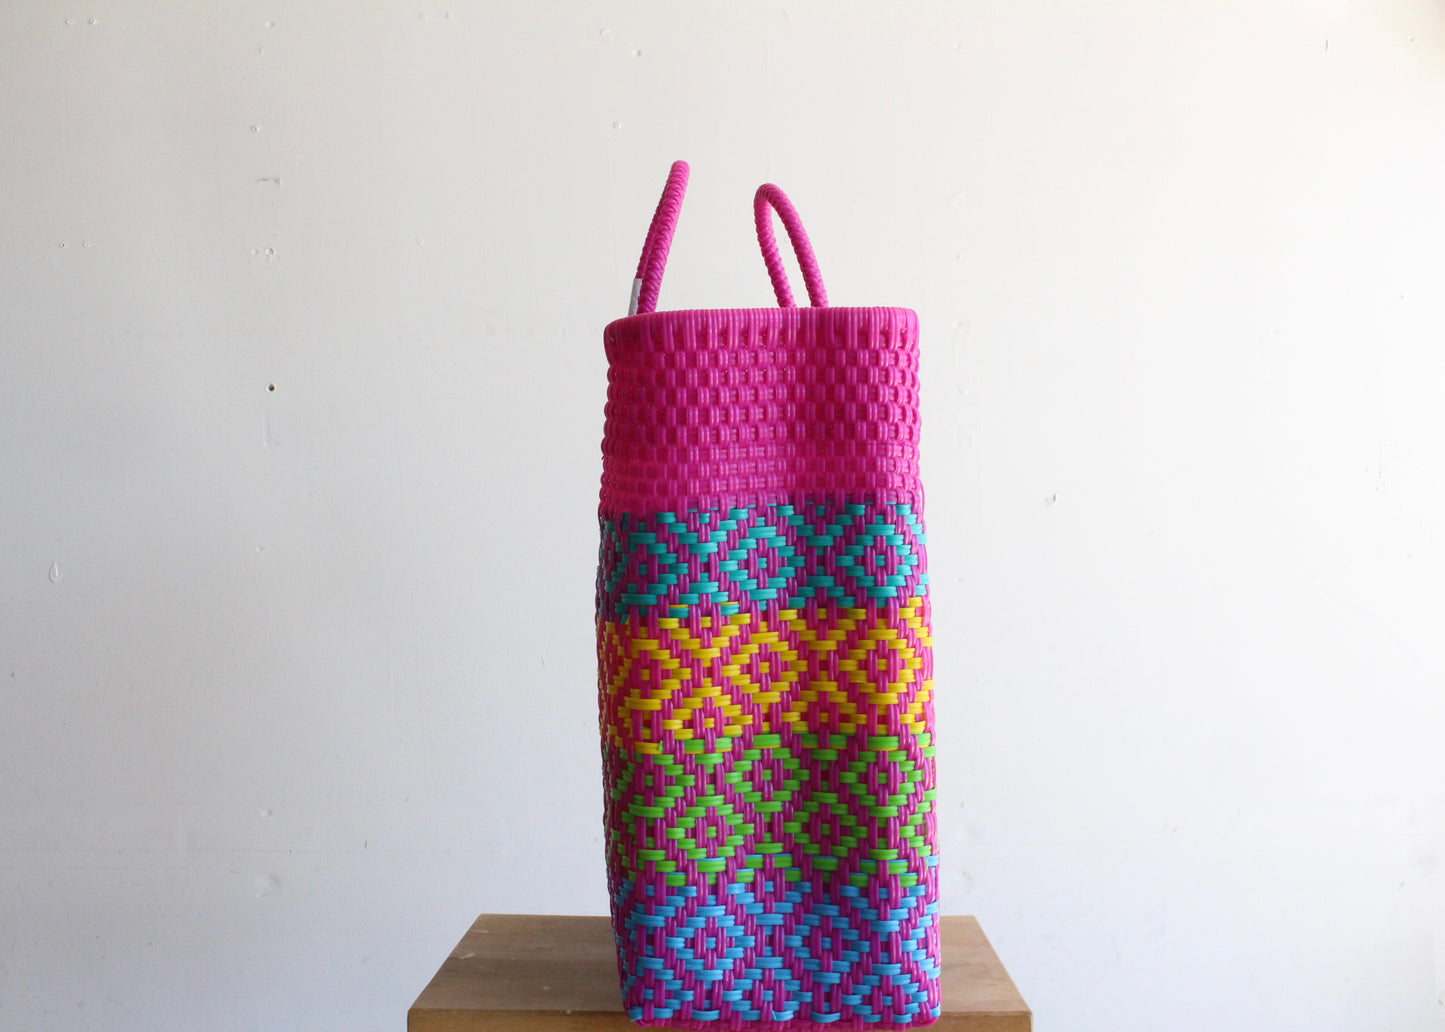 Hot Pink & Colors handwoven Mexican Tote by MexiMexi